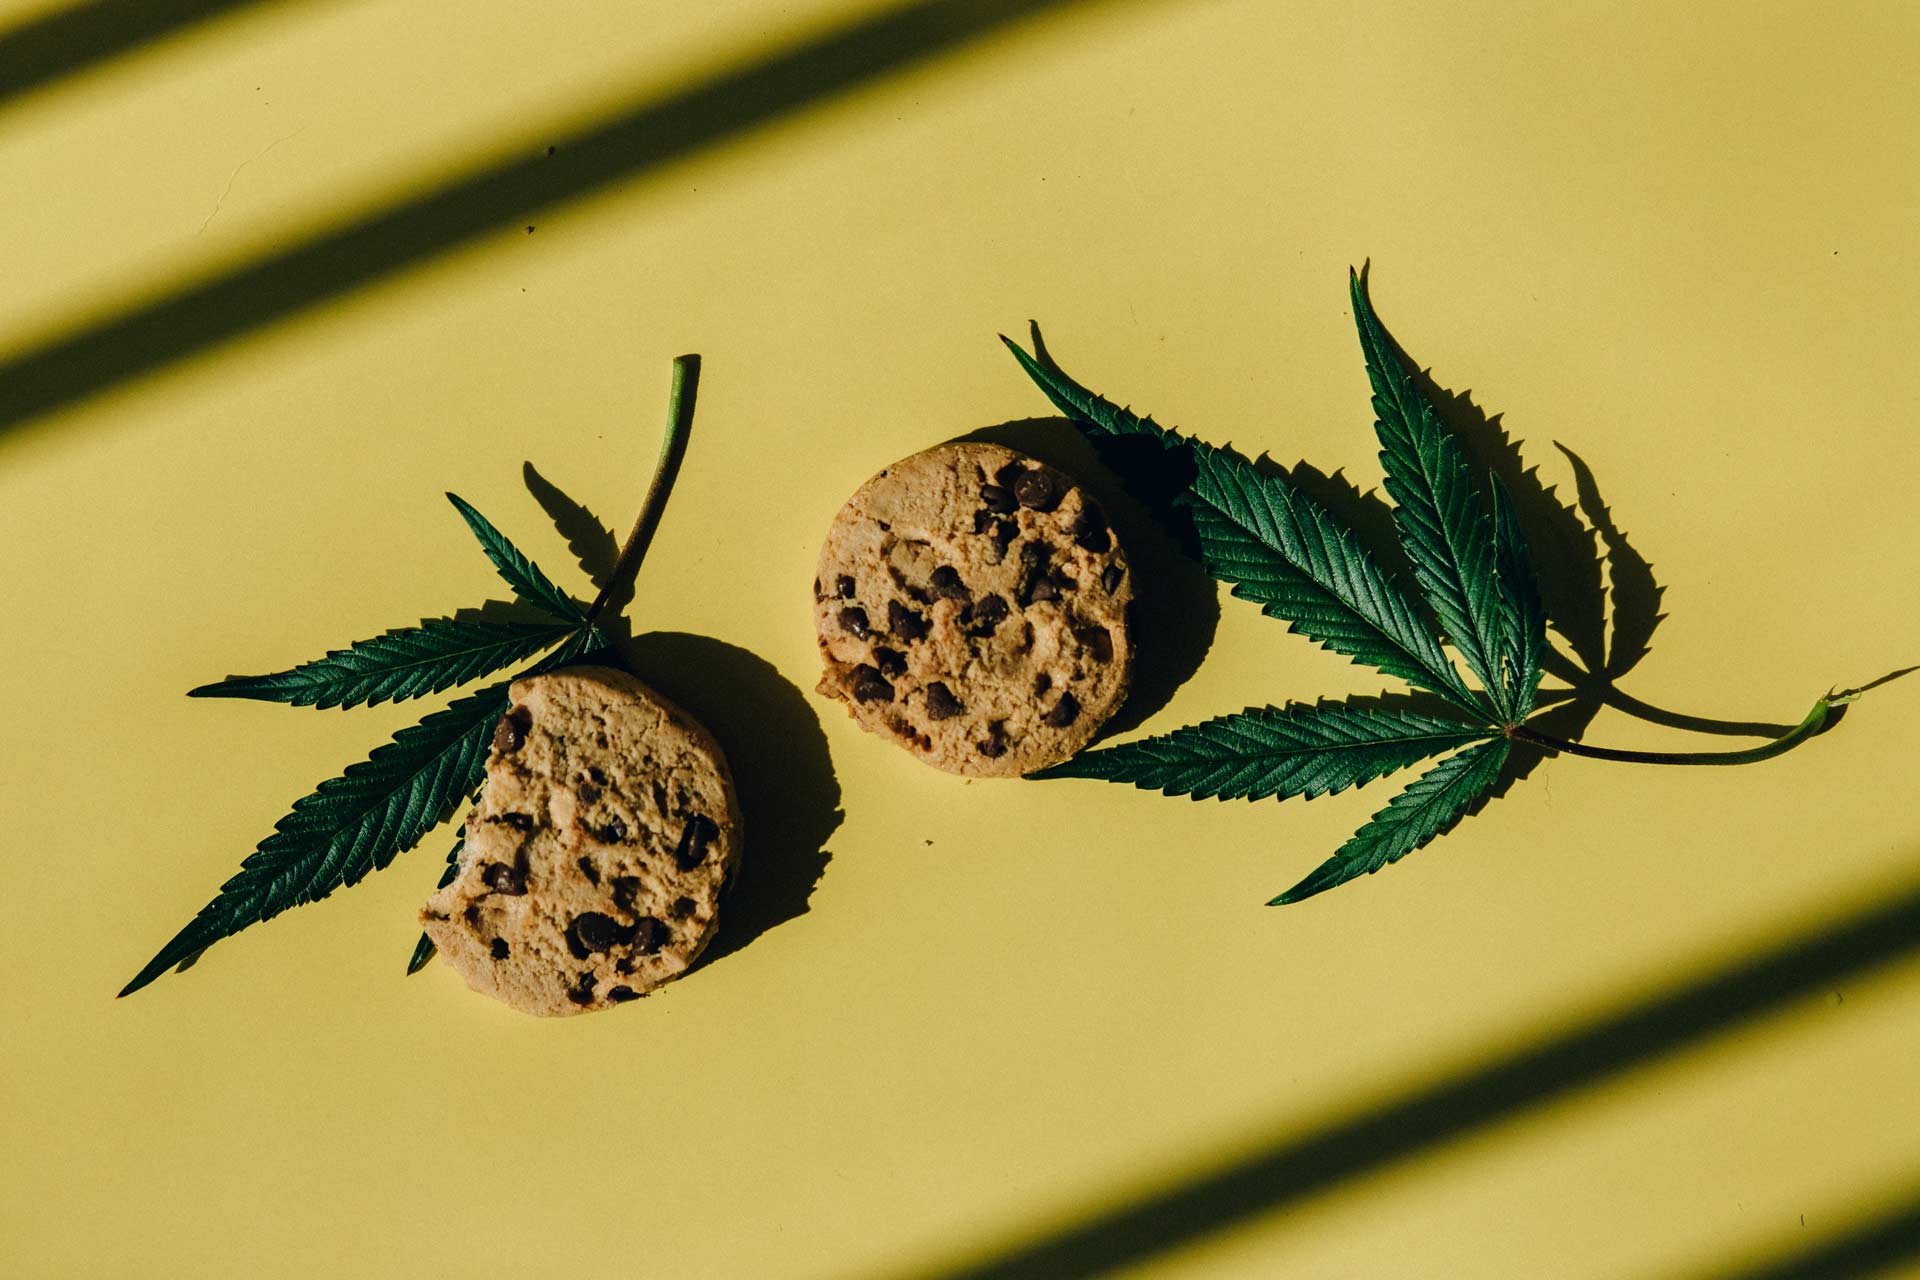 whole cookie and half eaten cookie on yellow background next to cannabis leafs